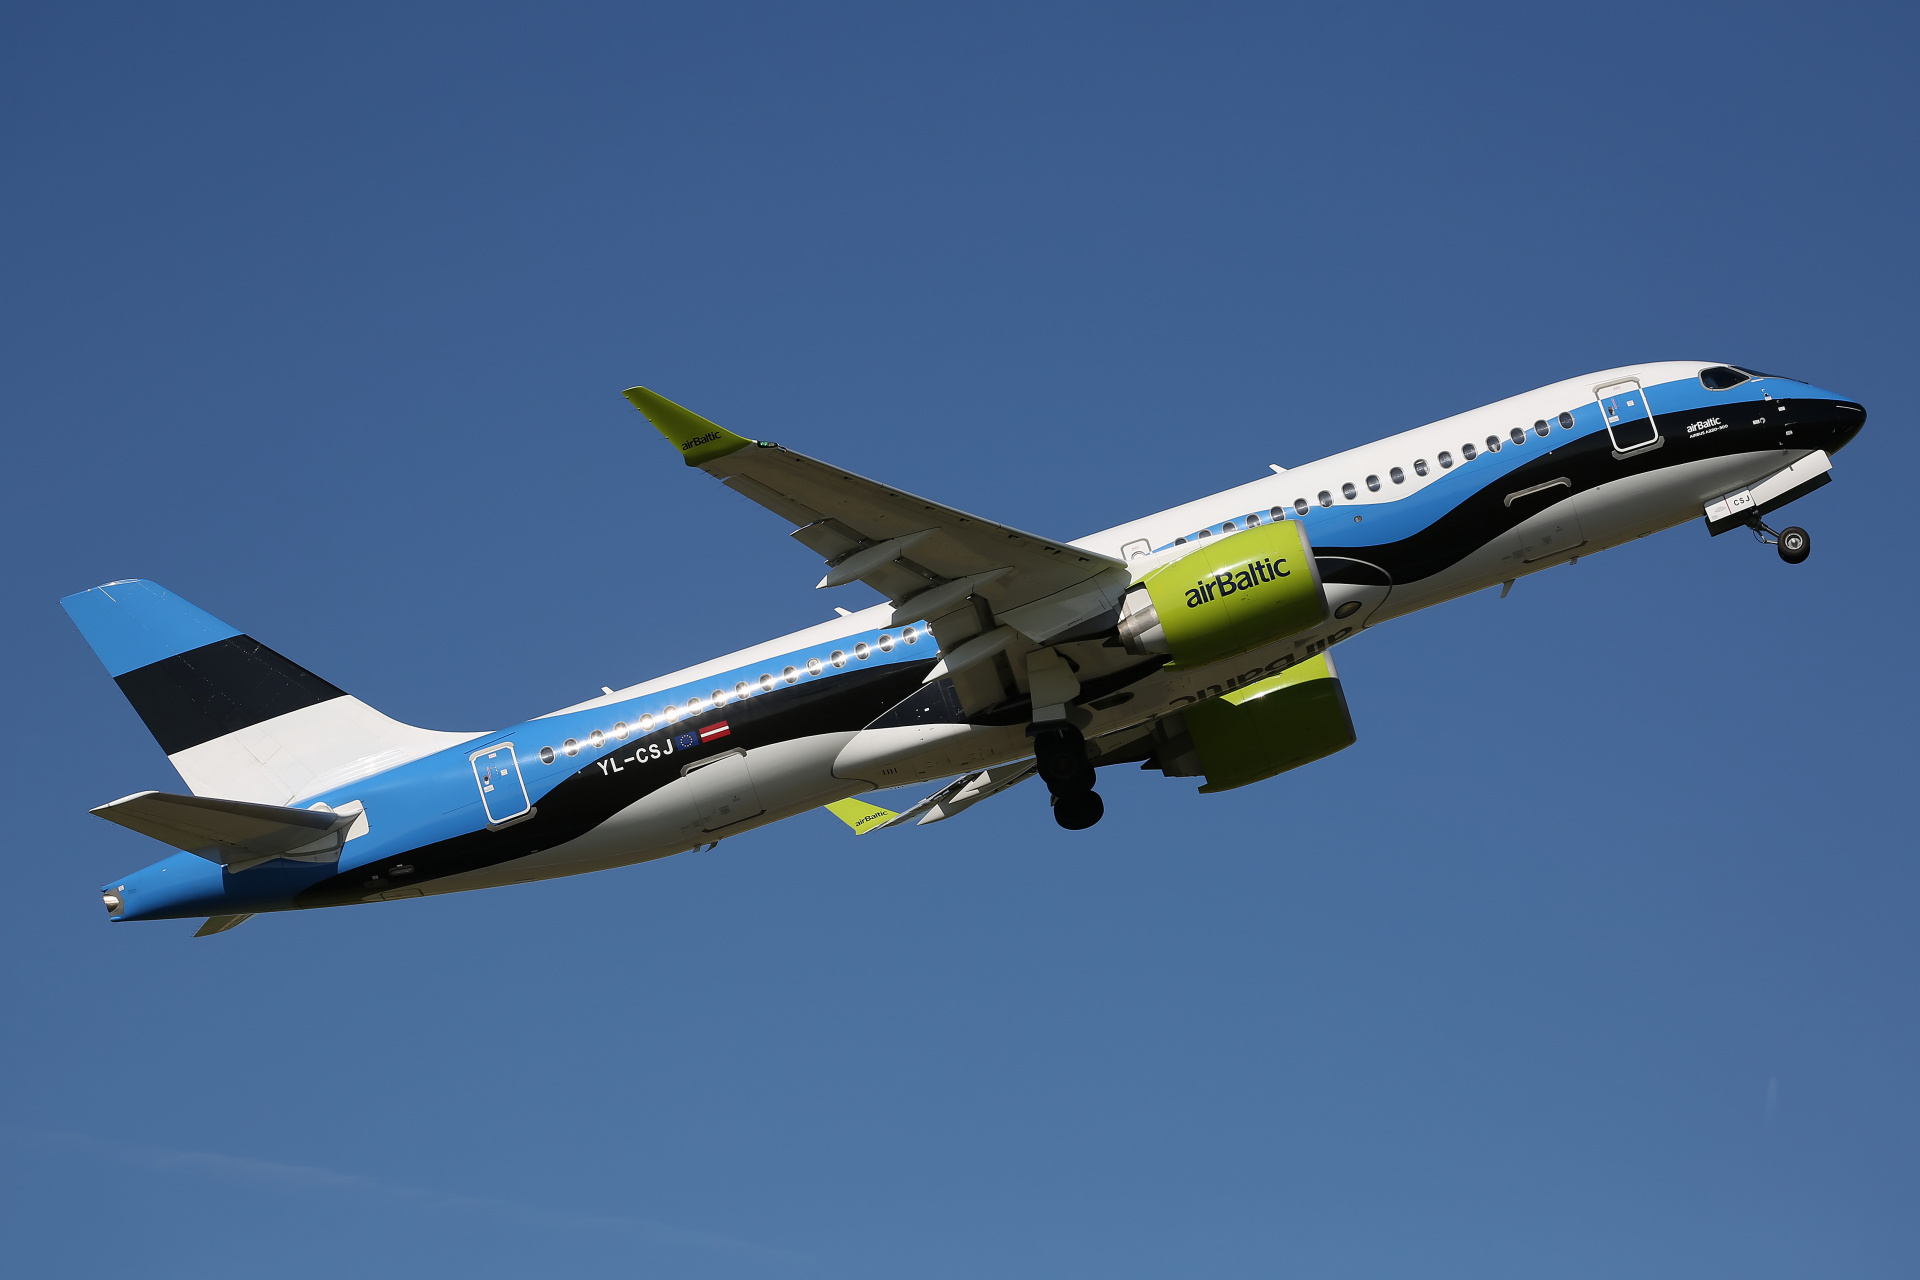 YL-CSJ, airBaltic (Estonian flag livery) (Aircraft » Schiphol Spotting » Airbus A220-300)